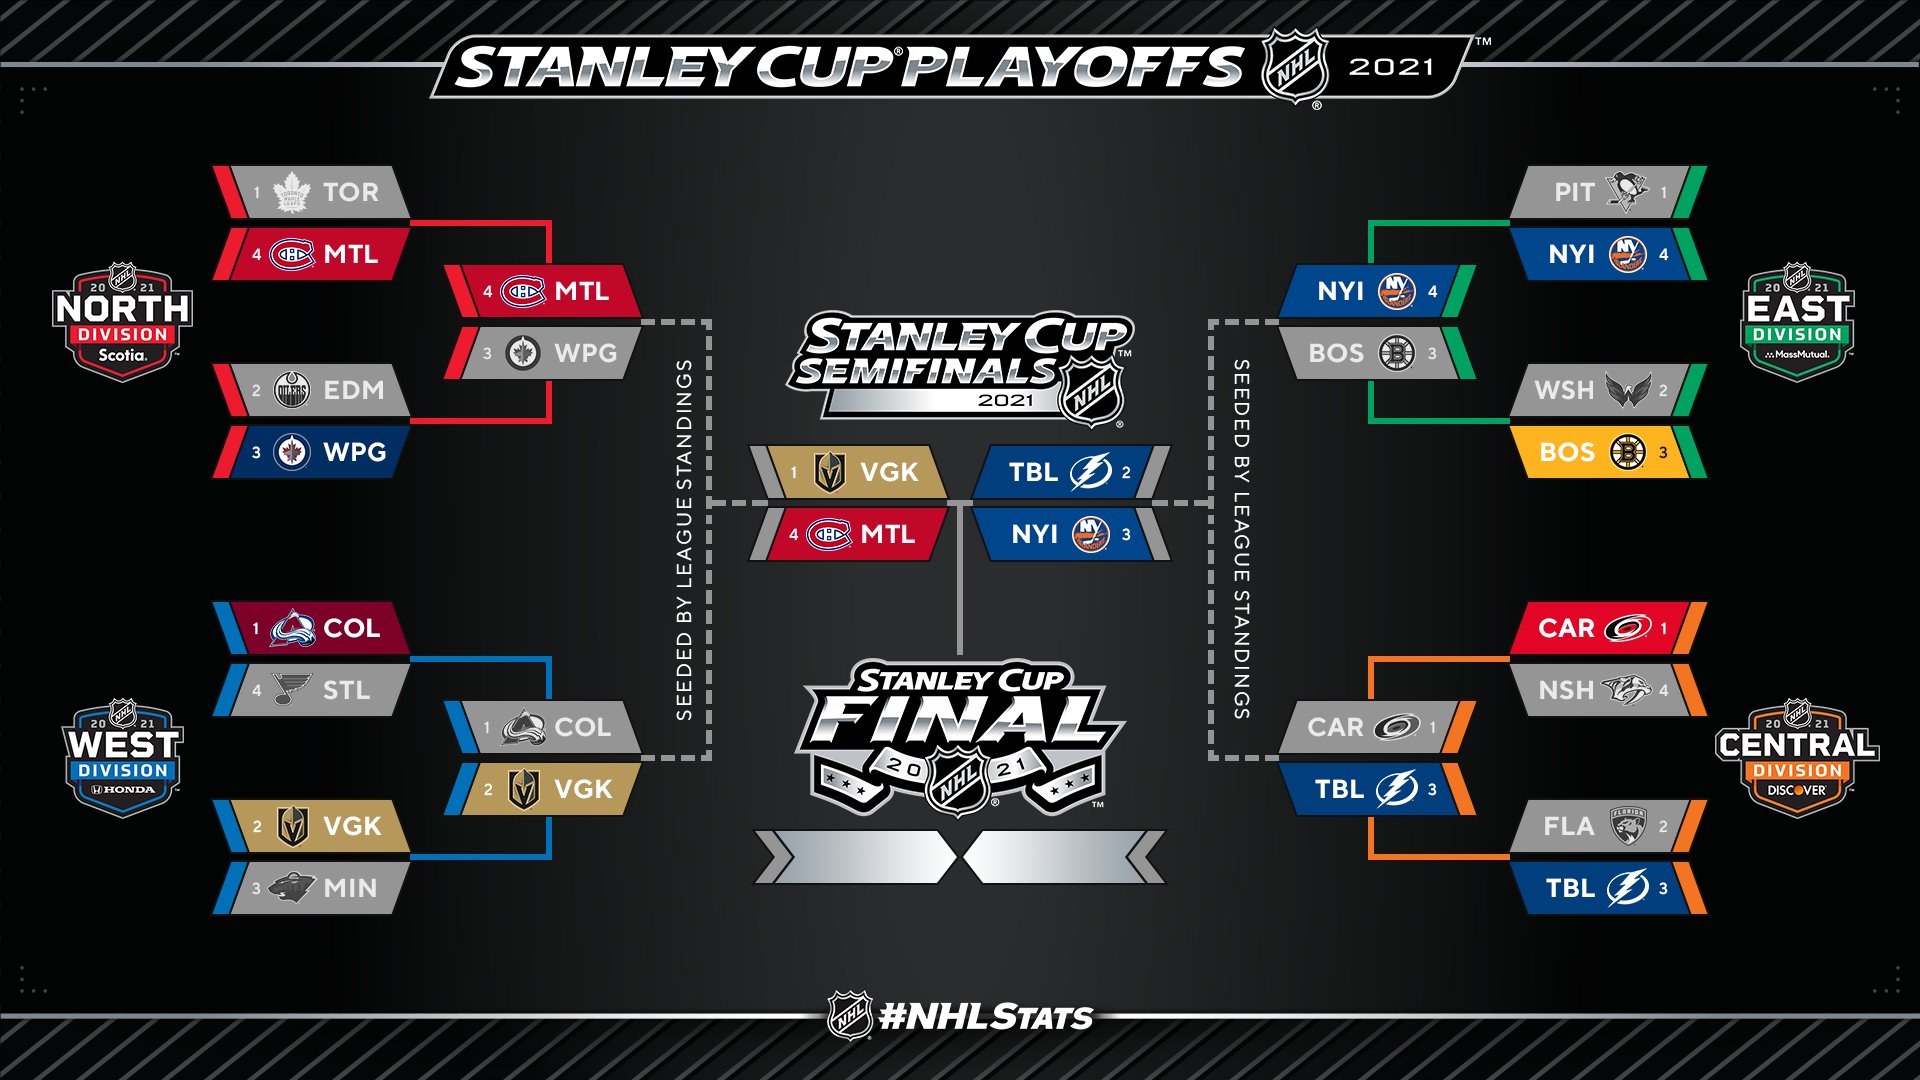 2021 Stanley Cup Playoffs: Semifinals matchups, schedule and TV info – The Swing of Things